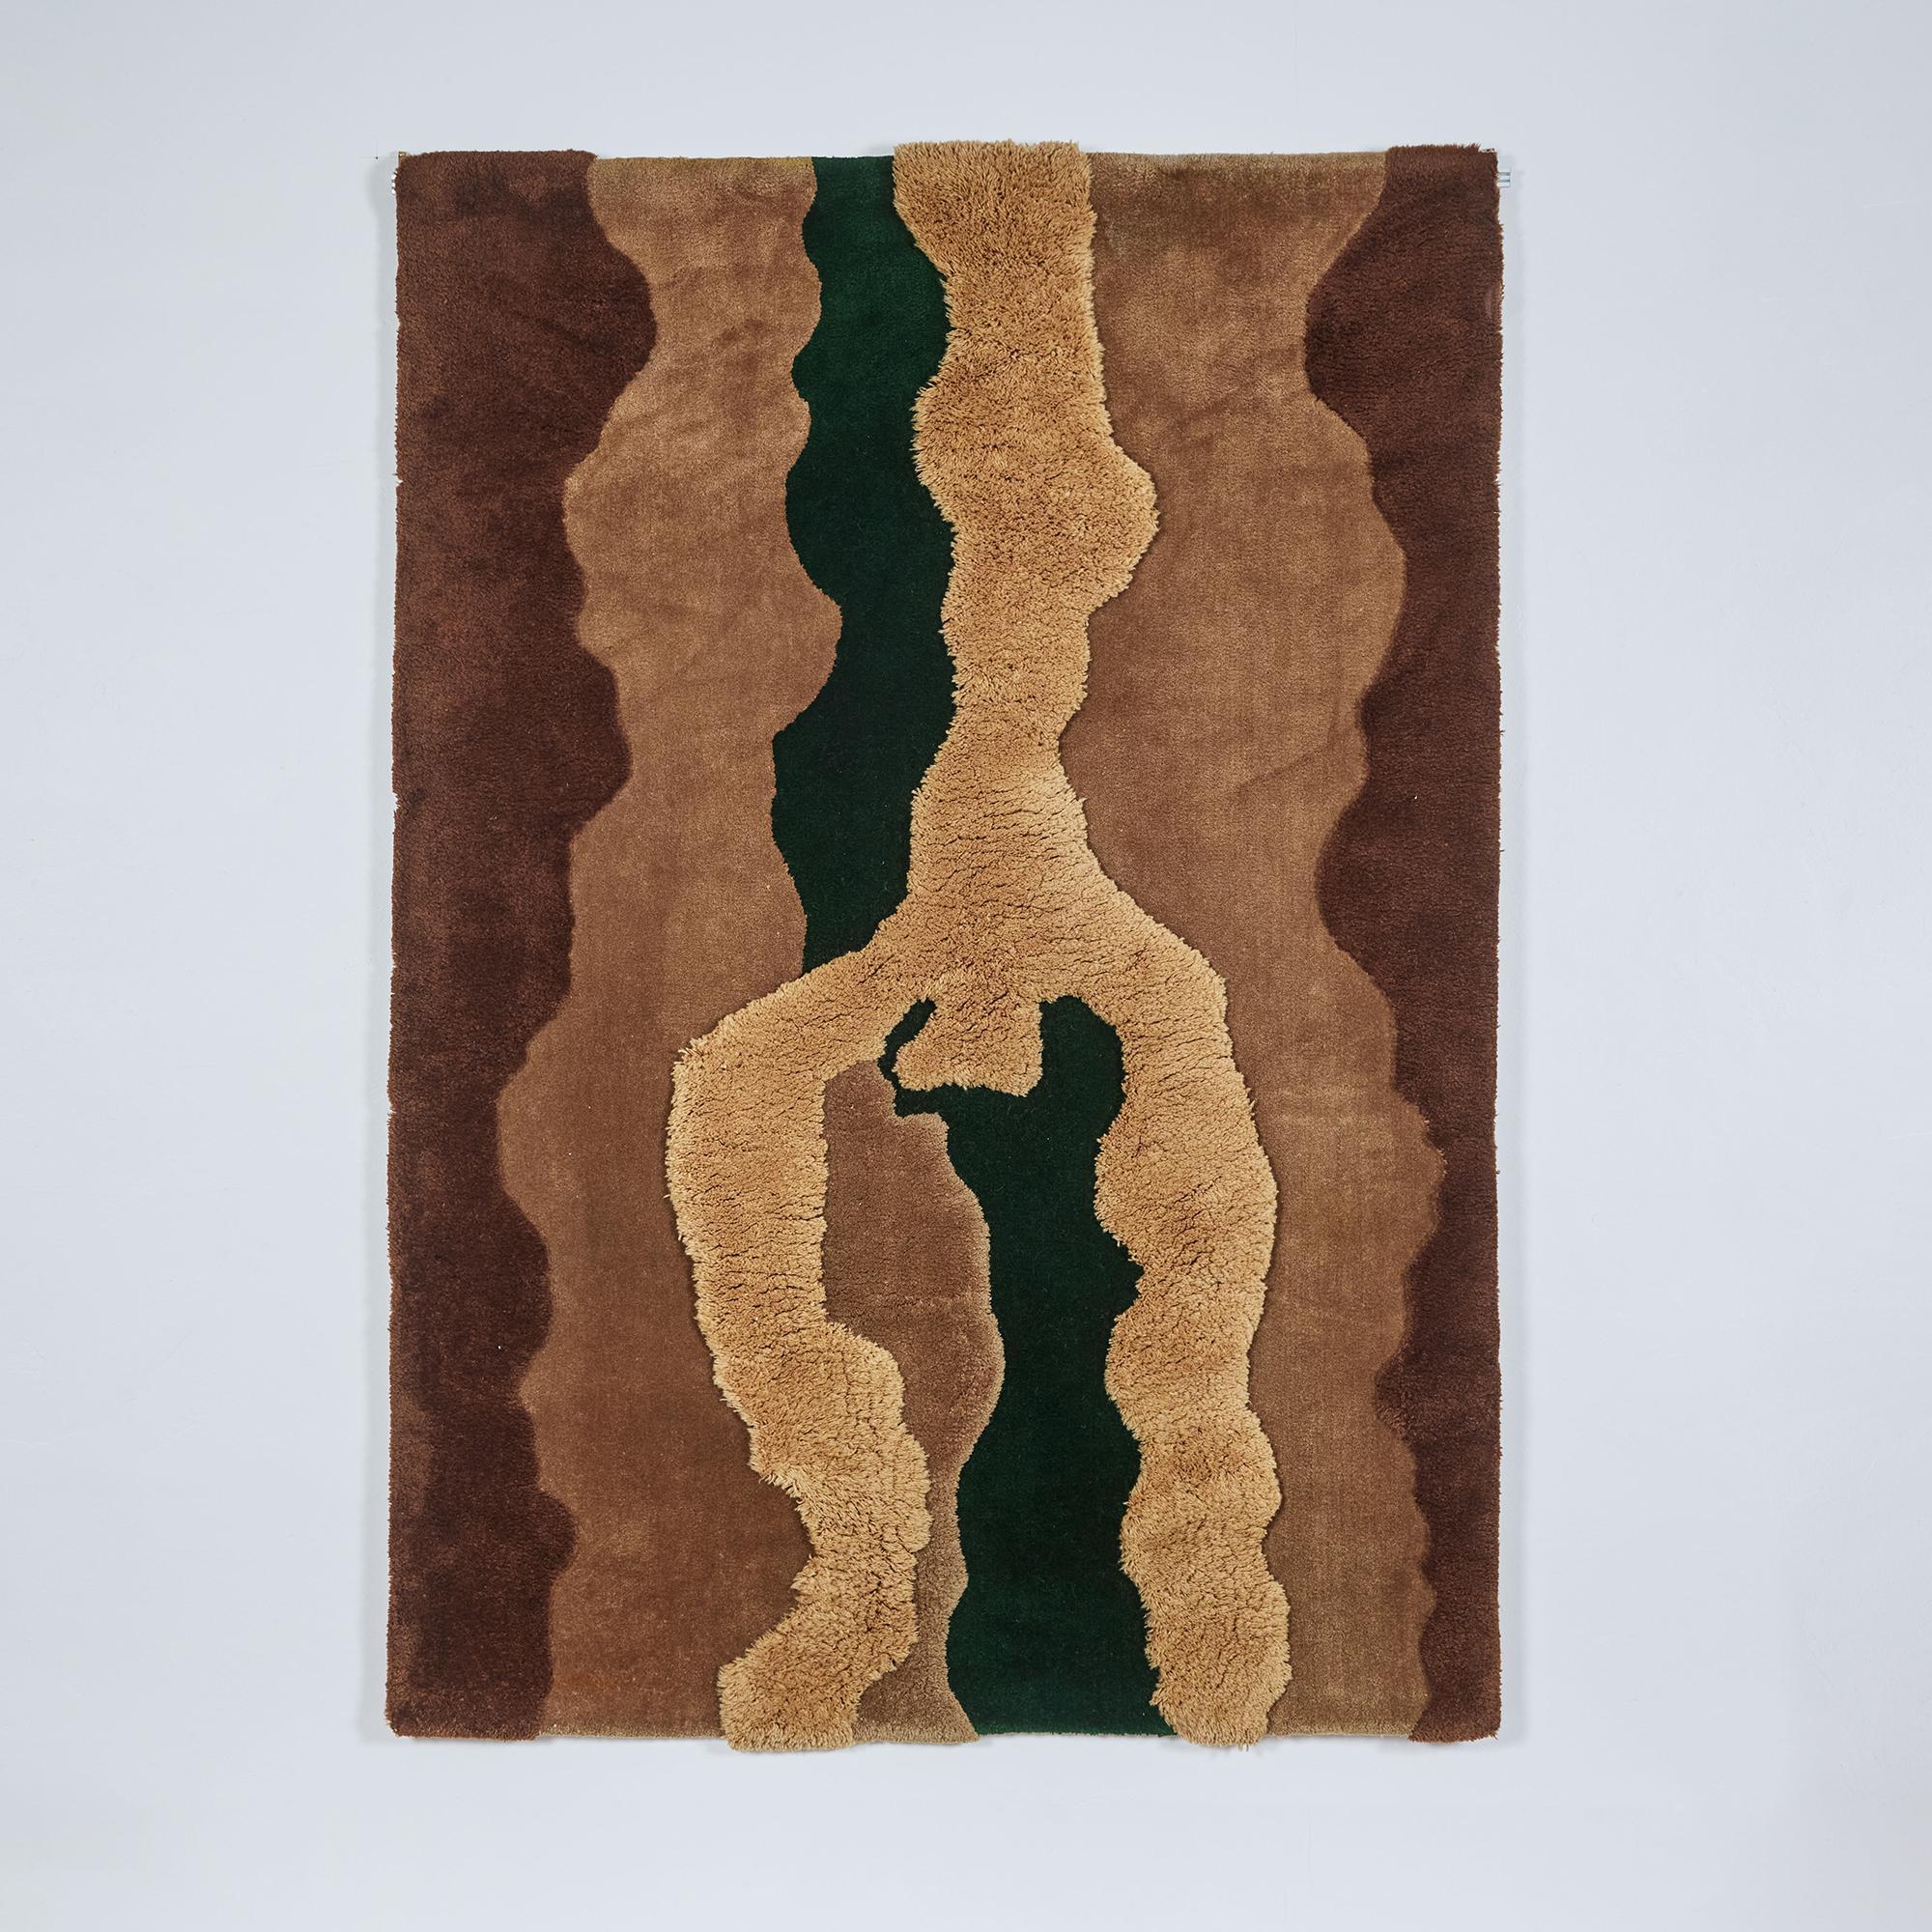 Edward Fields rug or tapestry, c.1970s, USA. This hand knotted wool rug features varying pile heights that add depth and texture to the piece. Its color ranges in tones of brown, caramel and tan with one section of deep forest green. This piece has